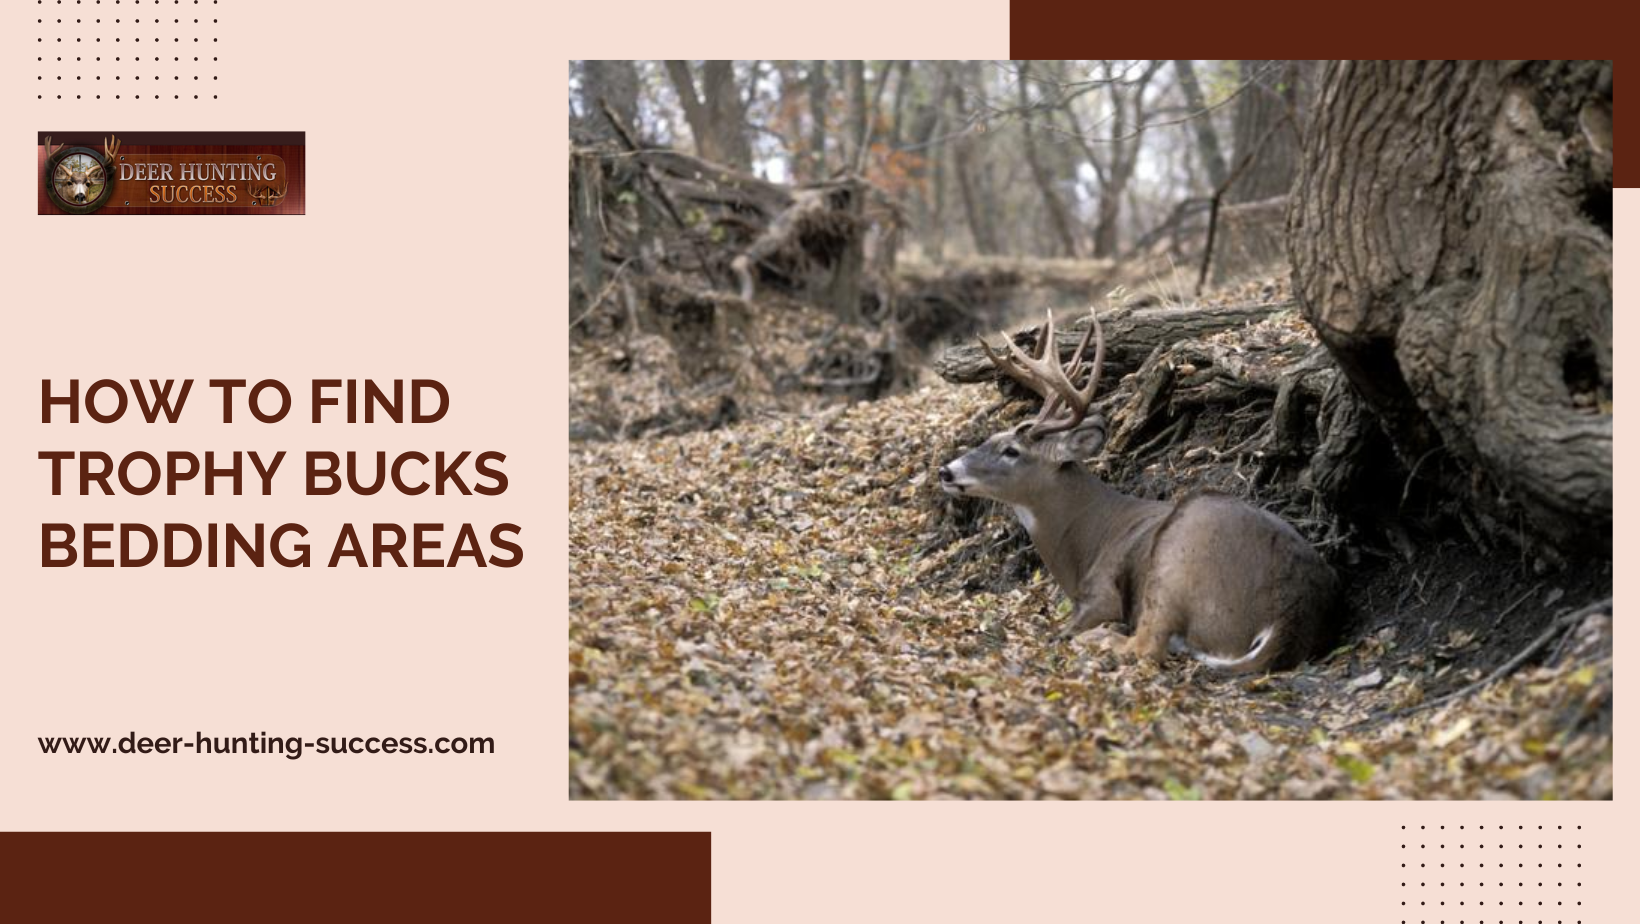 How to Find Trophy Bucks Bedding Areas